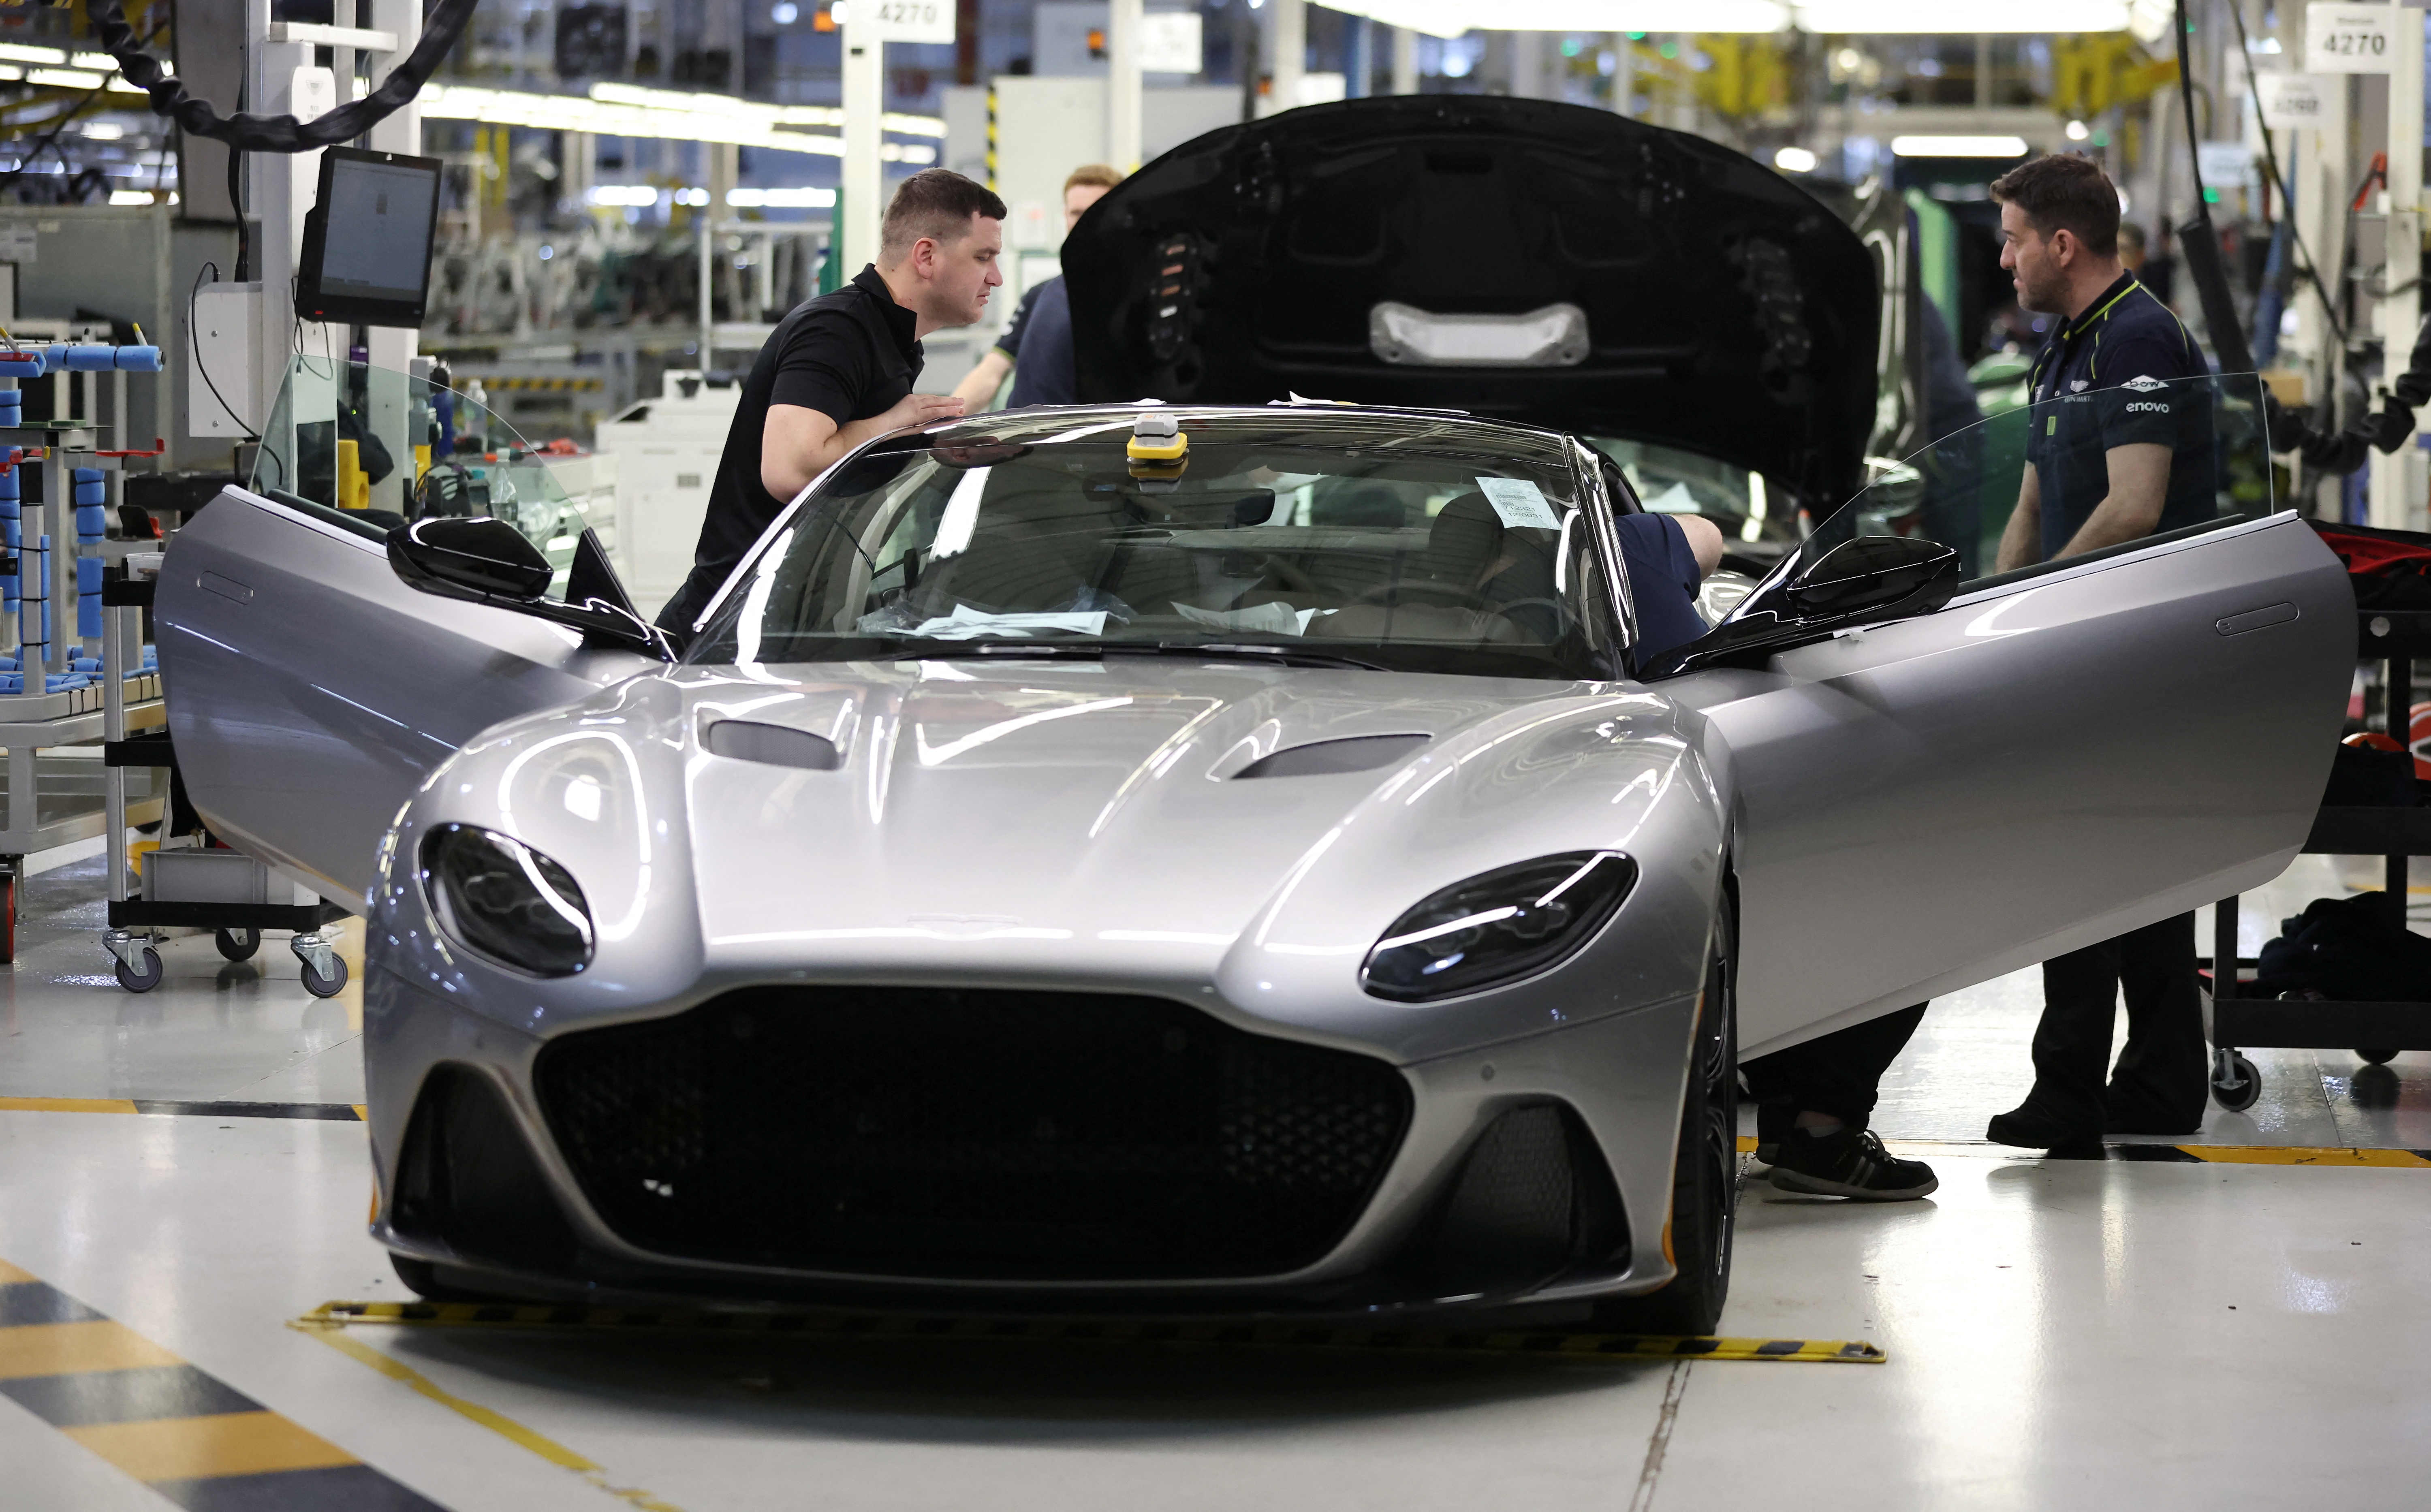 Employees work on a car at the Aston Martin factory in Gaydon